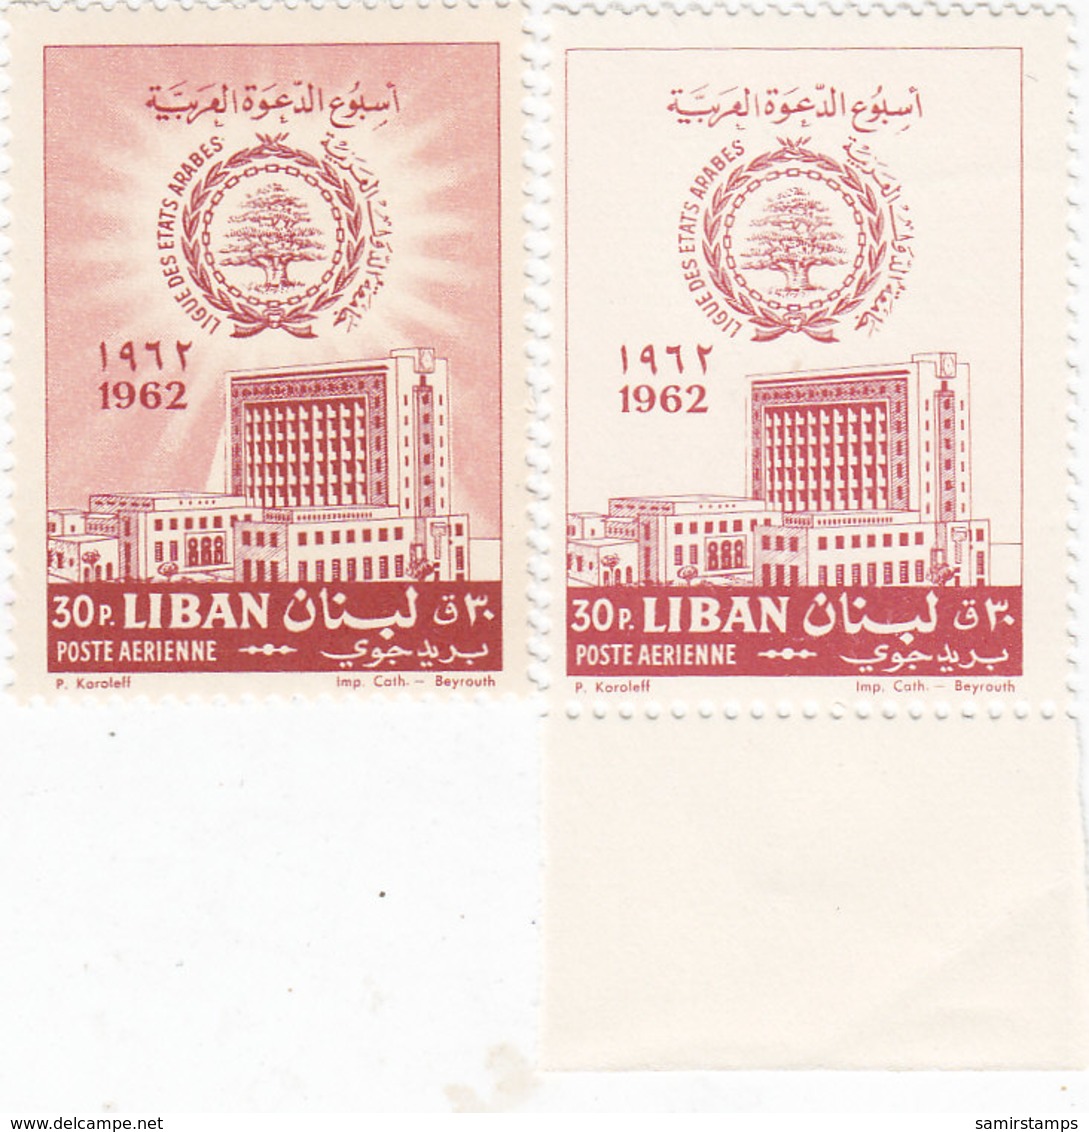 Lebanon-Liban 1962,ARAB LEAGUE 1 Value Missing Most Red Isnside+ 1 Normal Color -MNH- Red. Price - SKRILL PAYMENT ONLY - Lebanon